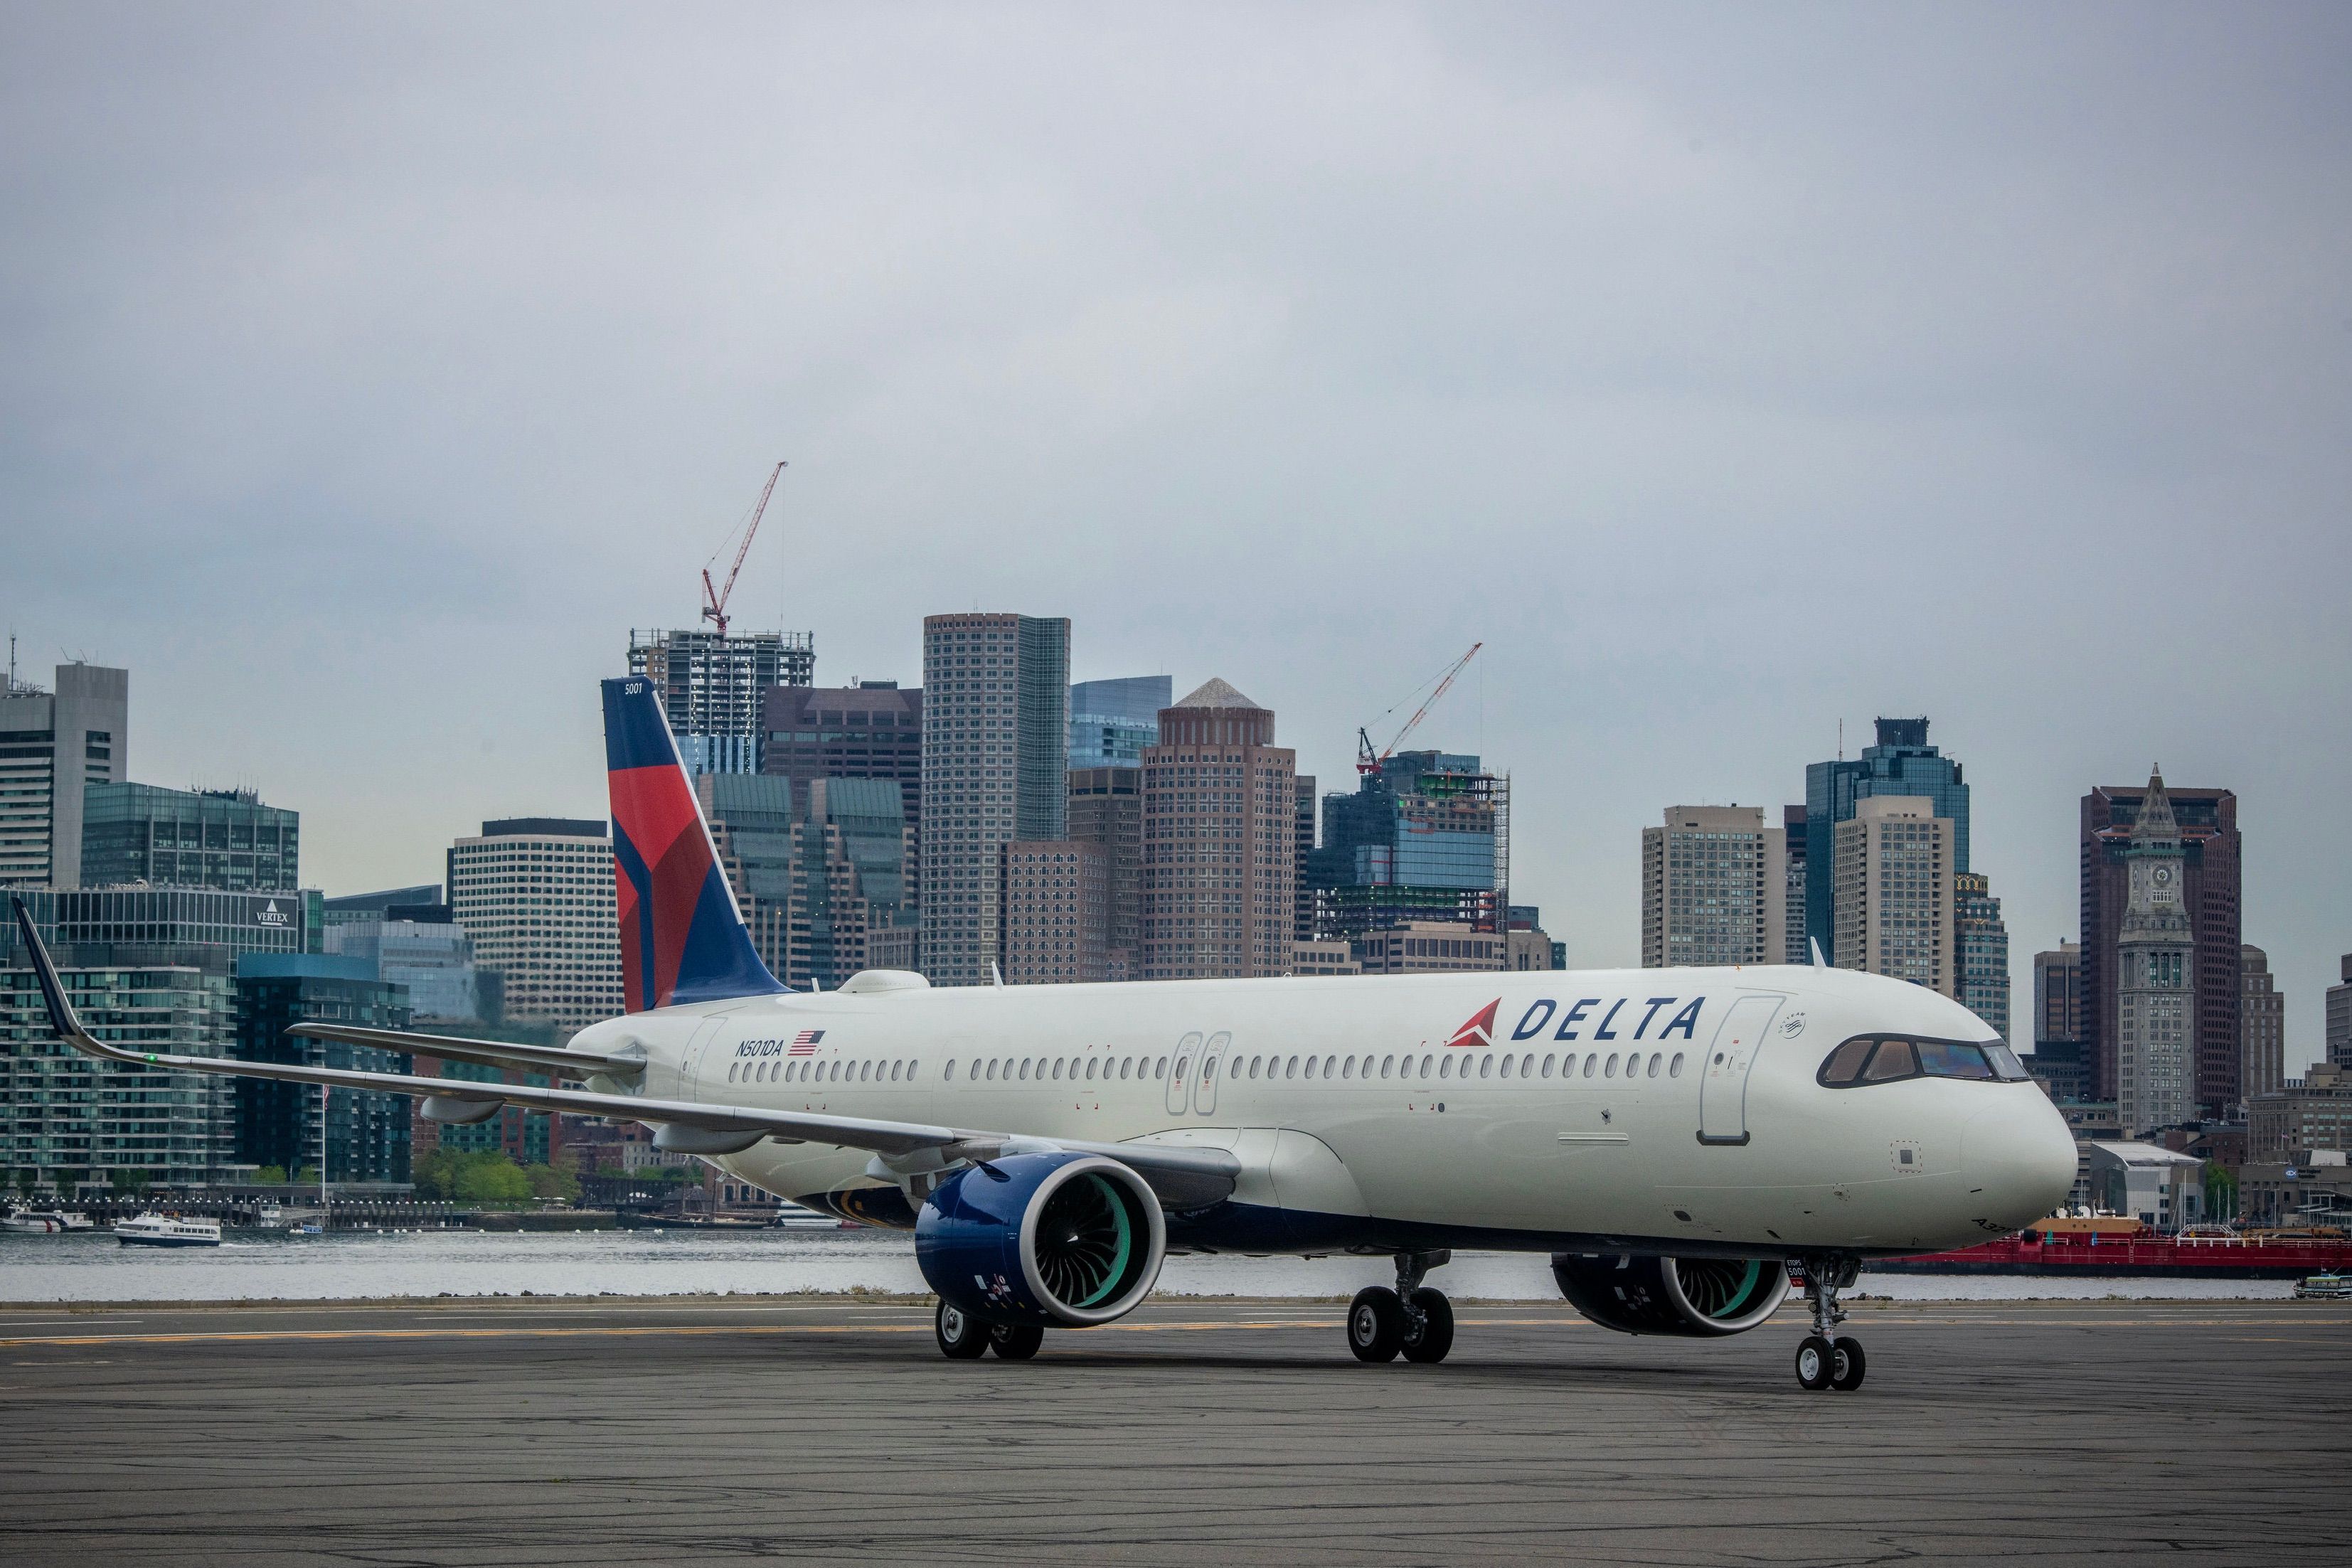 A Delta Air Lines Airbus A321neo on the ground at Boston Logan Airport.